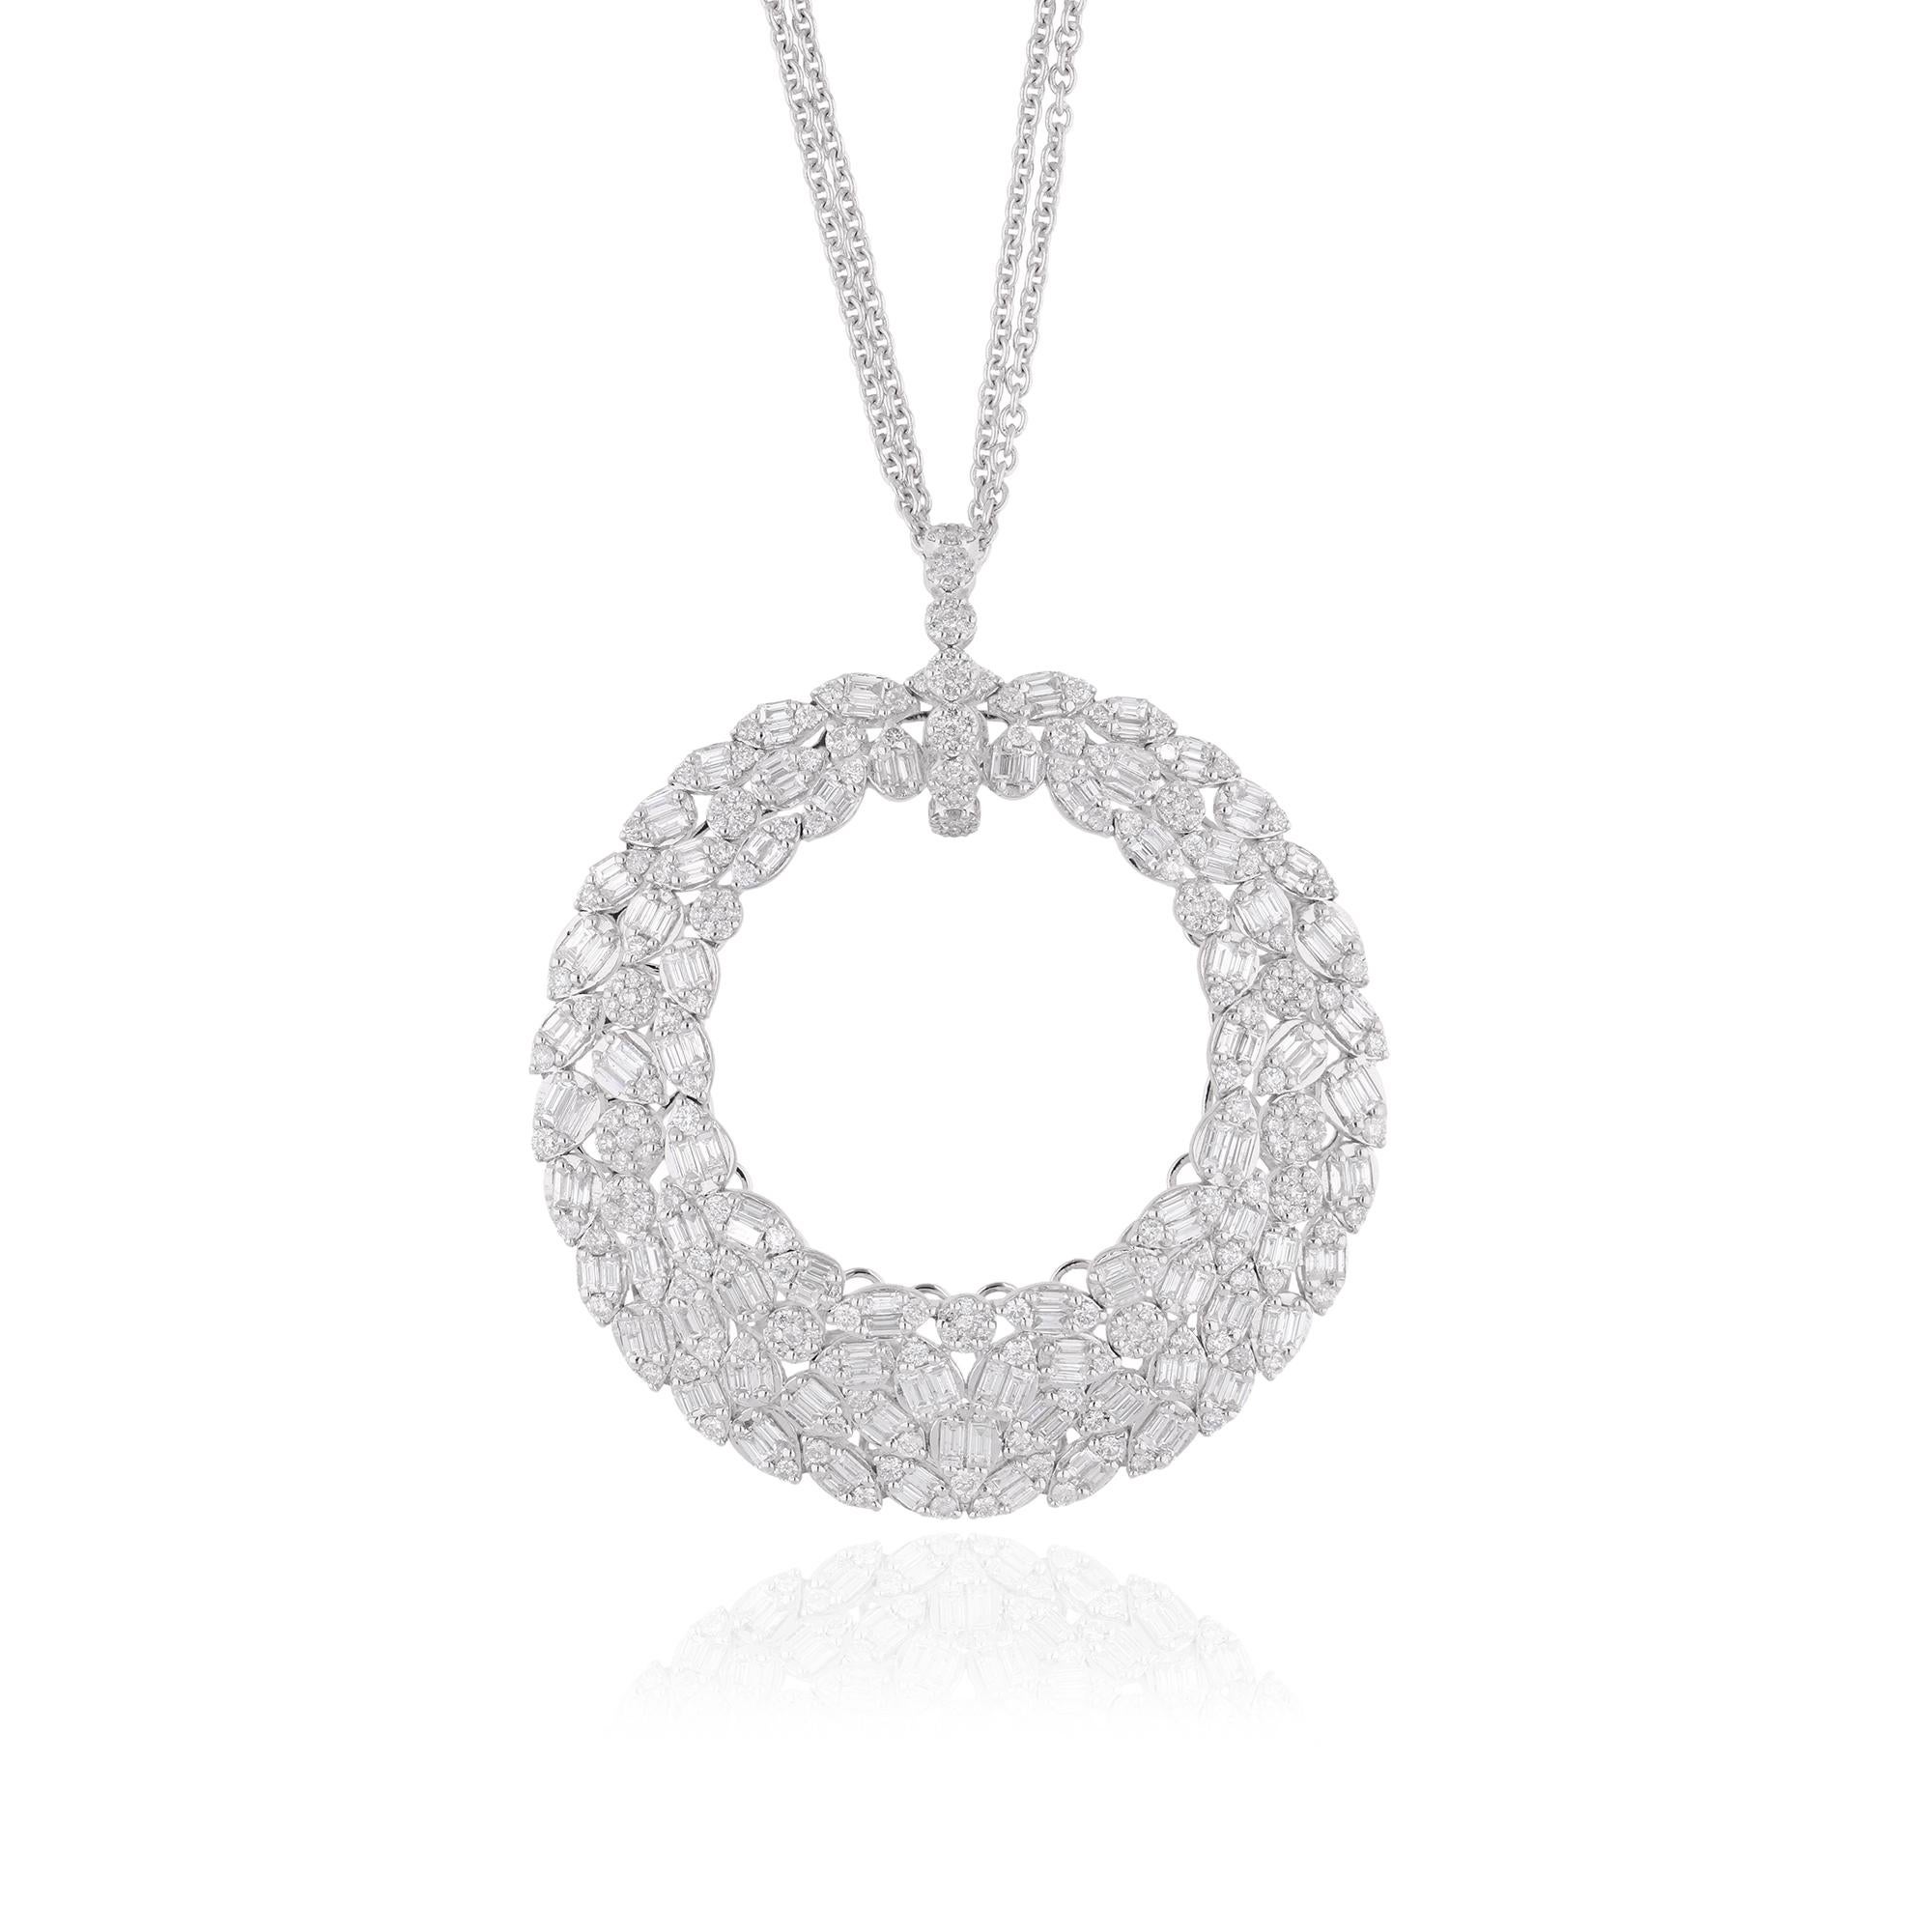 The focal point of the necklace is a remarkable 4.25 carat natural diamond centerpiece, showcasing the impeccable beauty of baguette-cut diamonds. These elongated stones are known for their sleek lines and unique sparkle, adding a touch of modernity